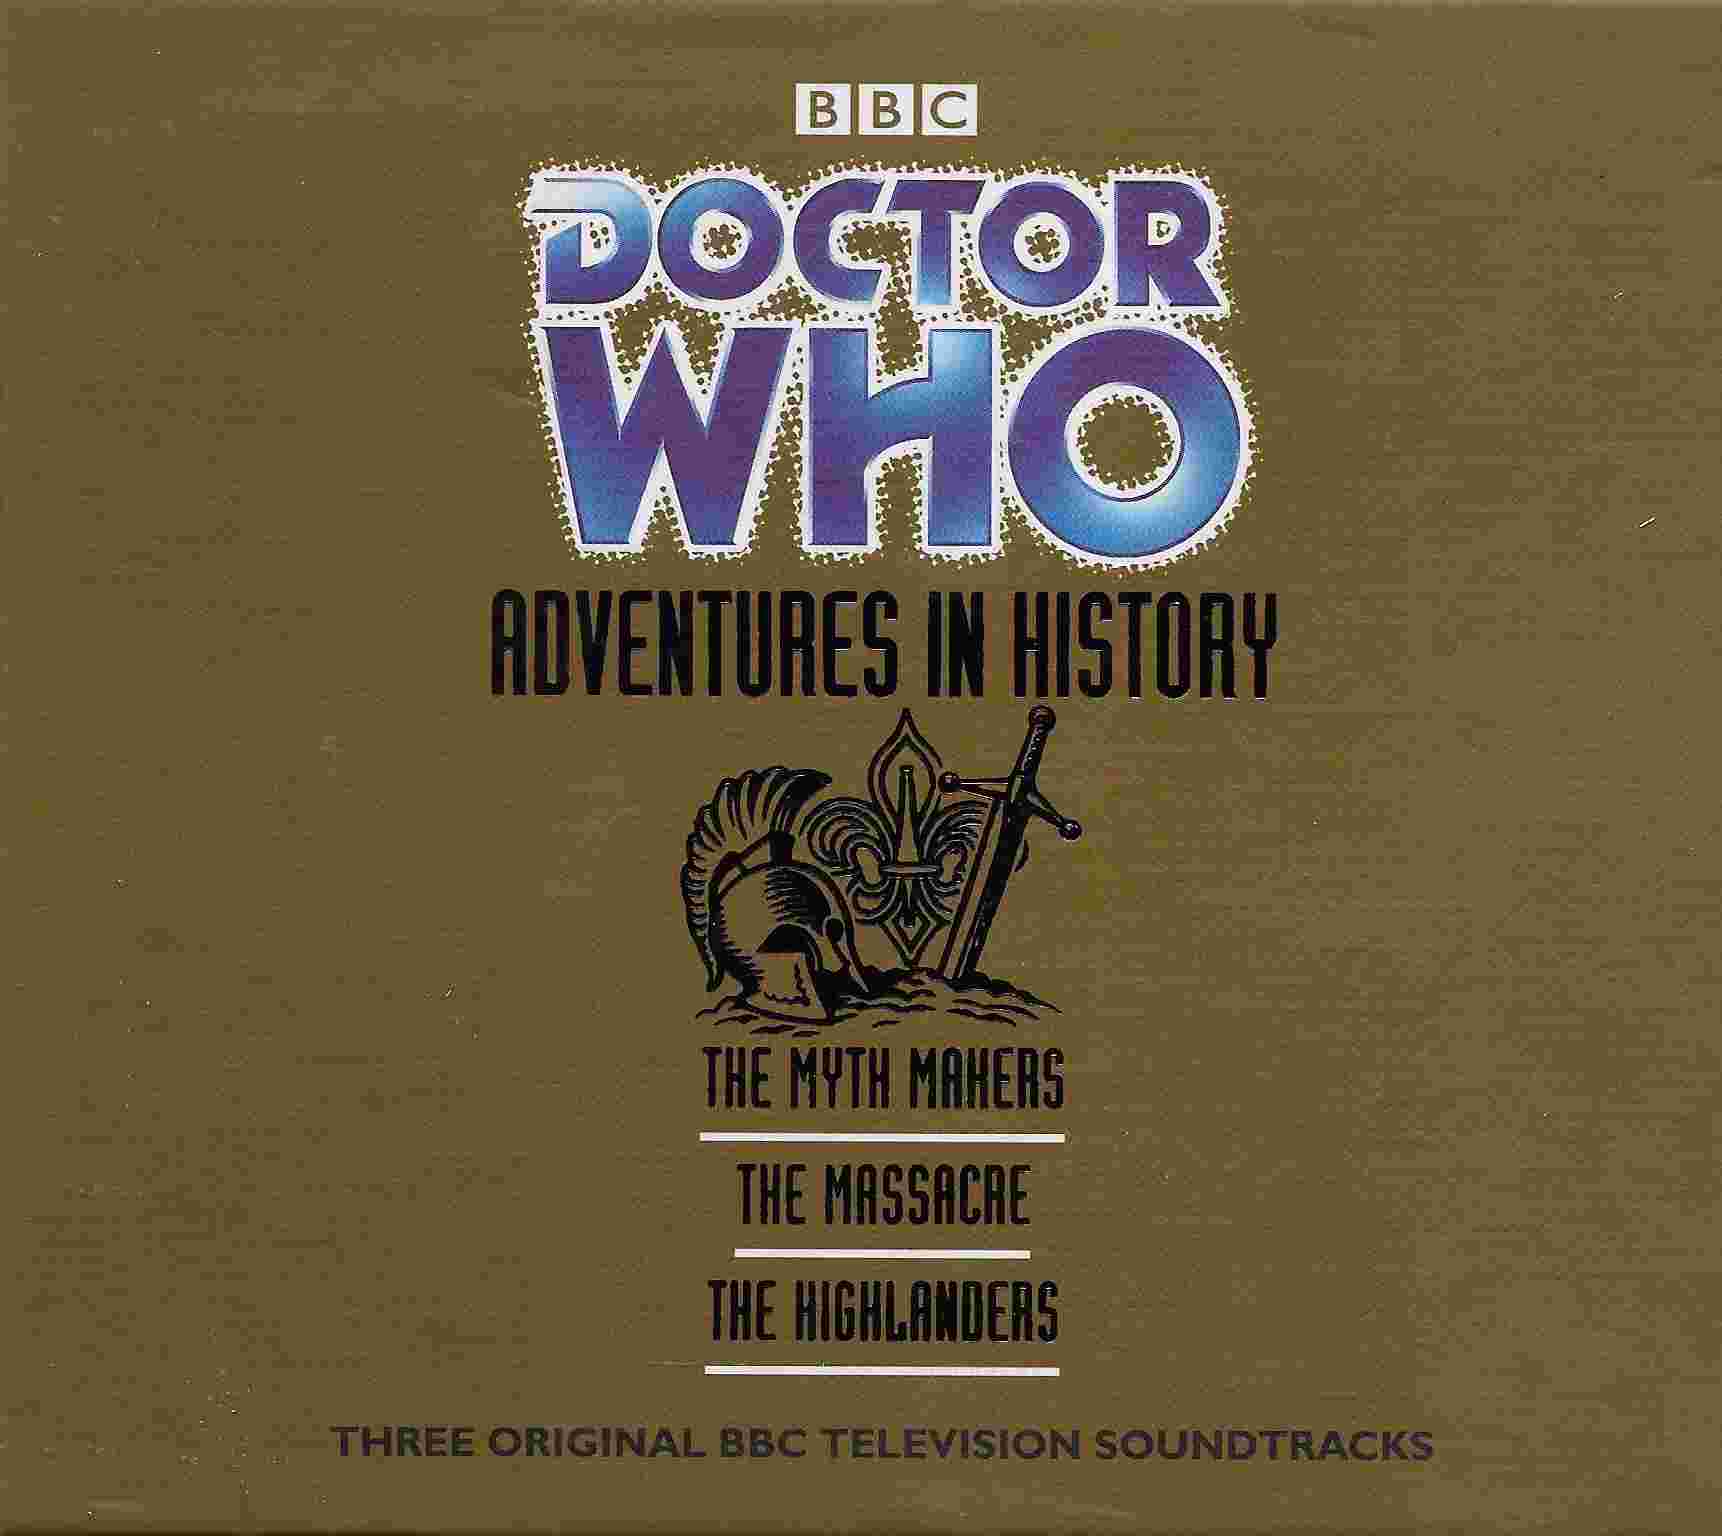 Picture of ISBN 0-563-49494-8 Doctor Who - Adventures in history by artist Donald Cotton / John Lucarotti / Gerry Davis	 from the BBC records and Tapes library